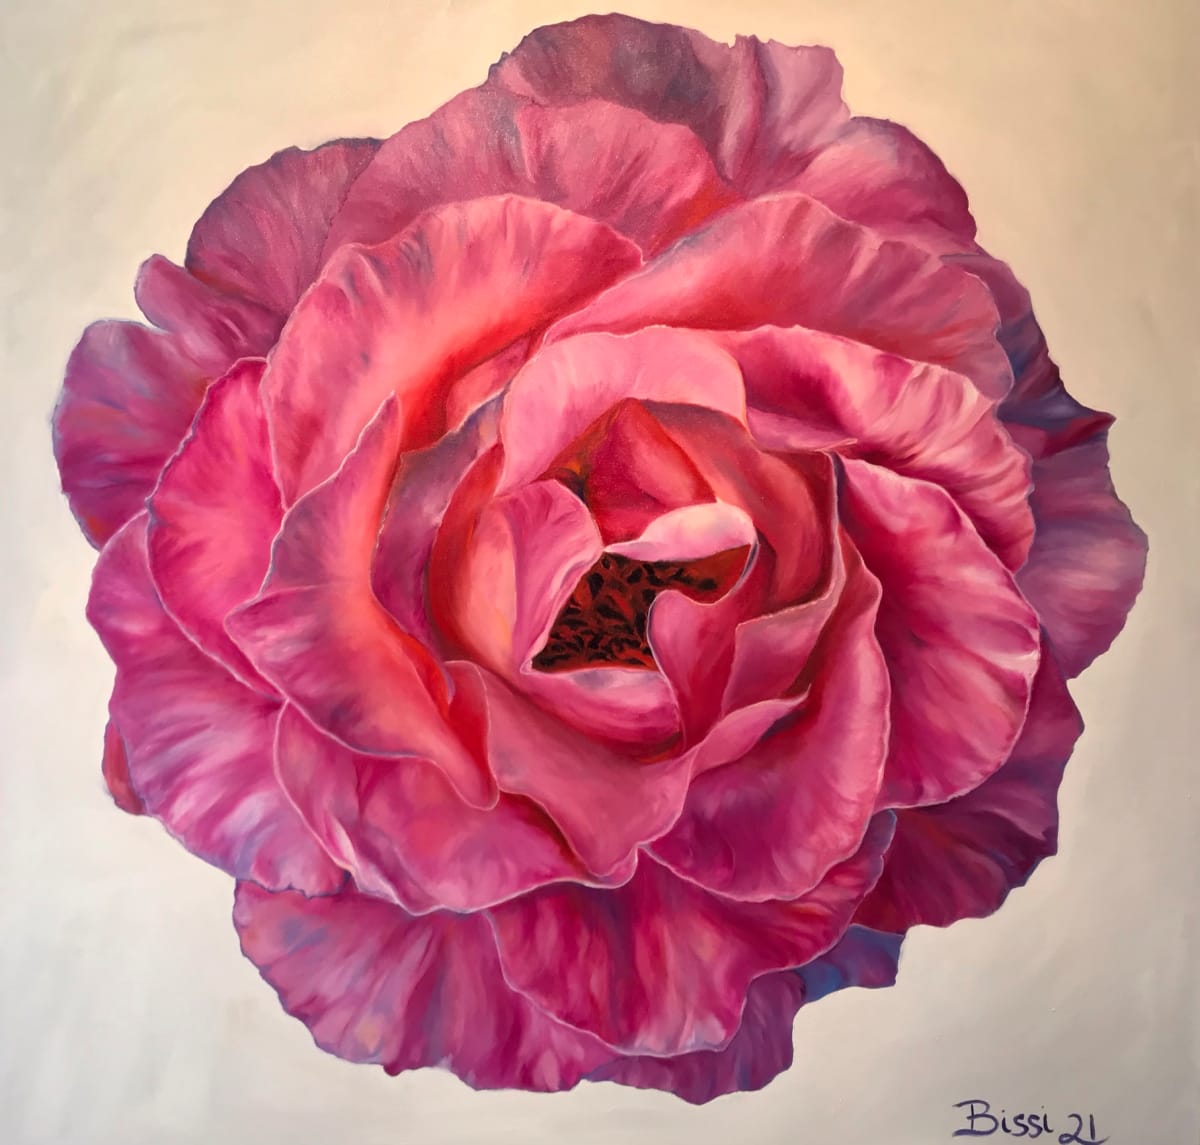 Pink Rose by Rebecca Bissi  Image: Part of a series of four roses using the same reference photograph.